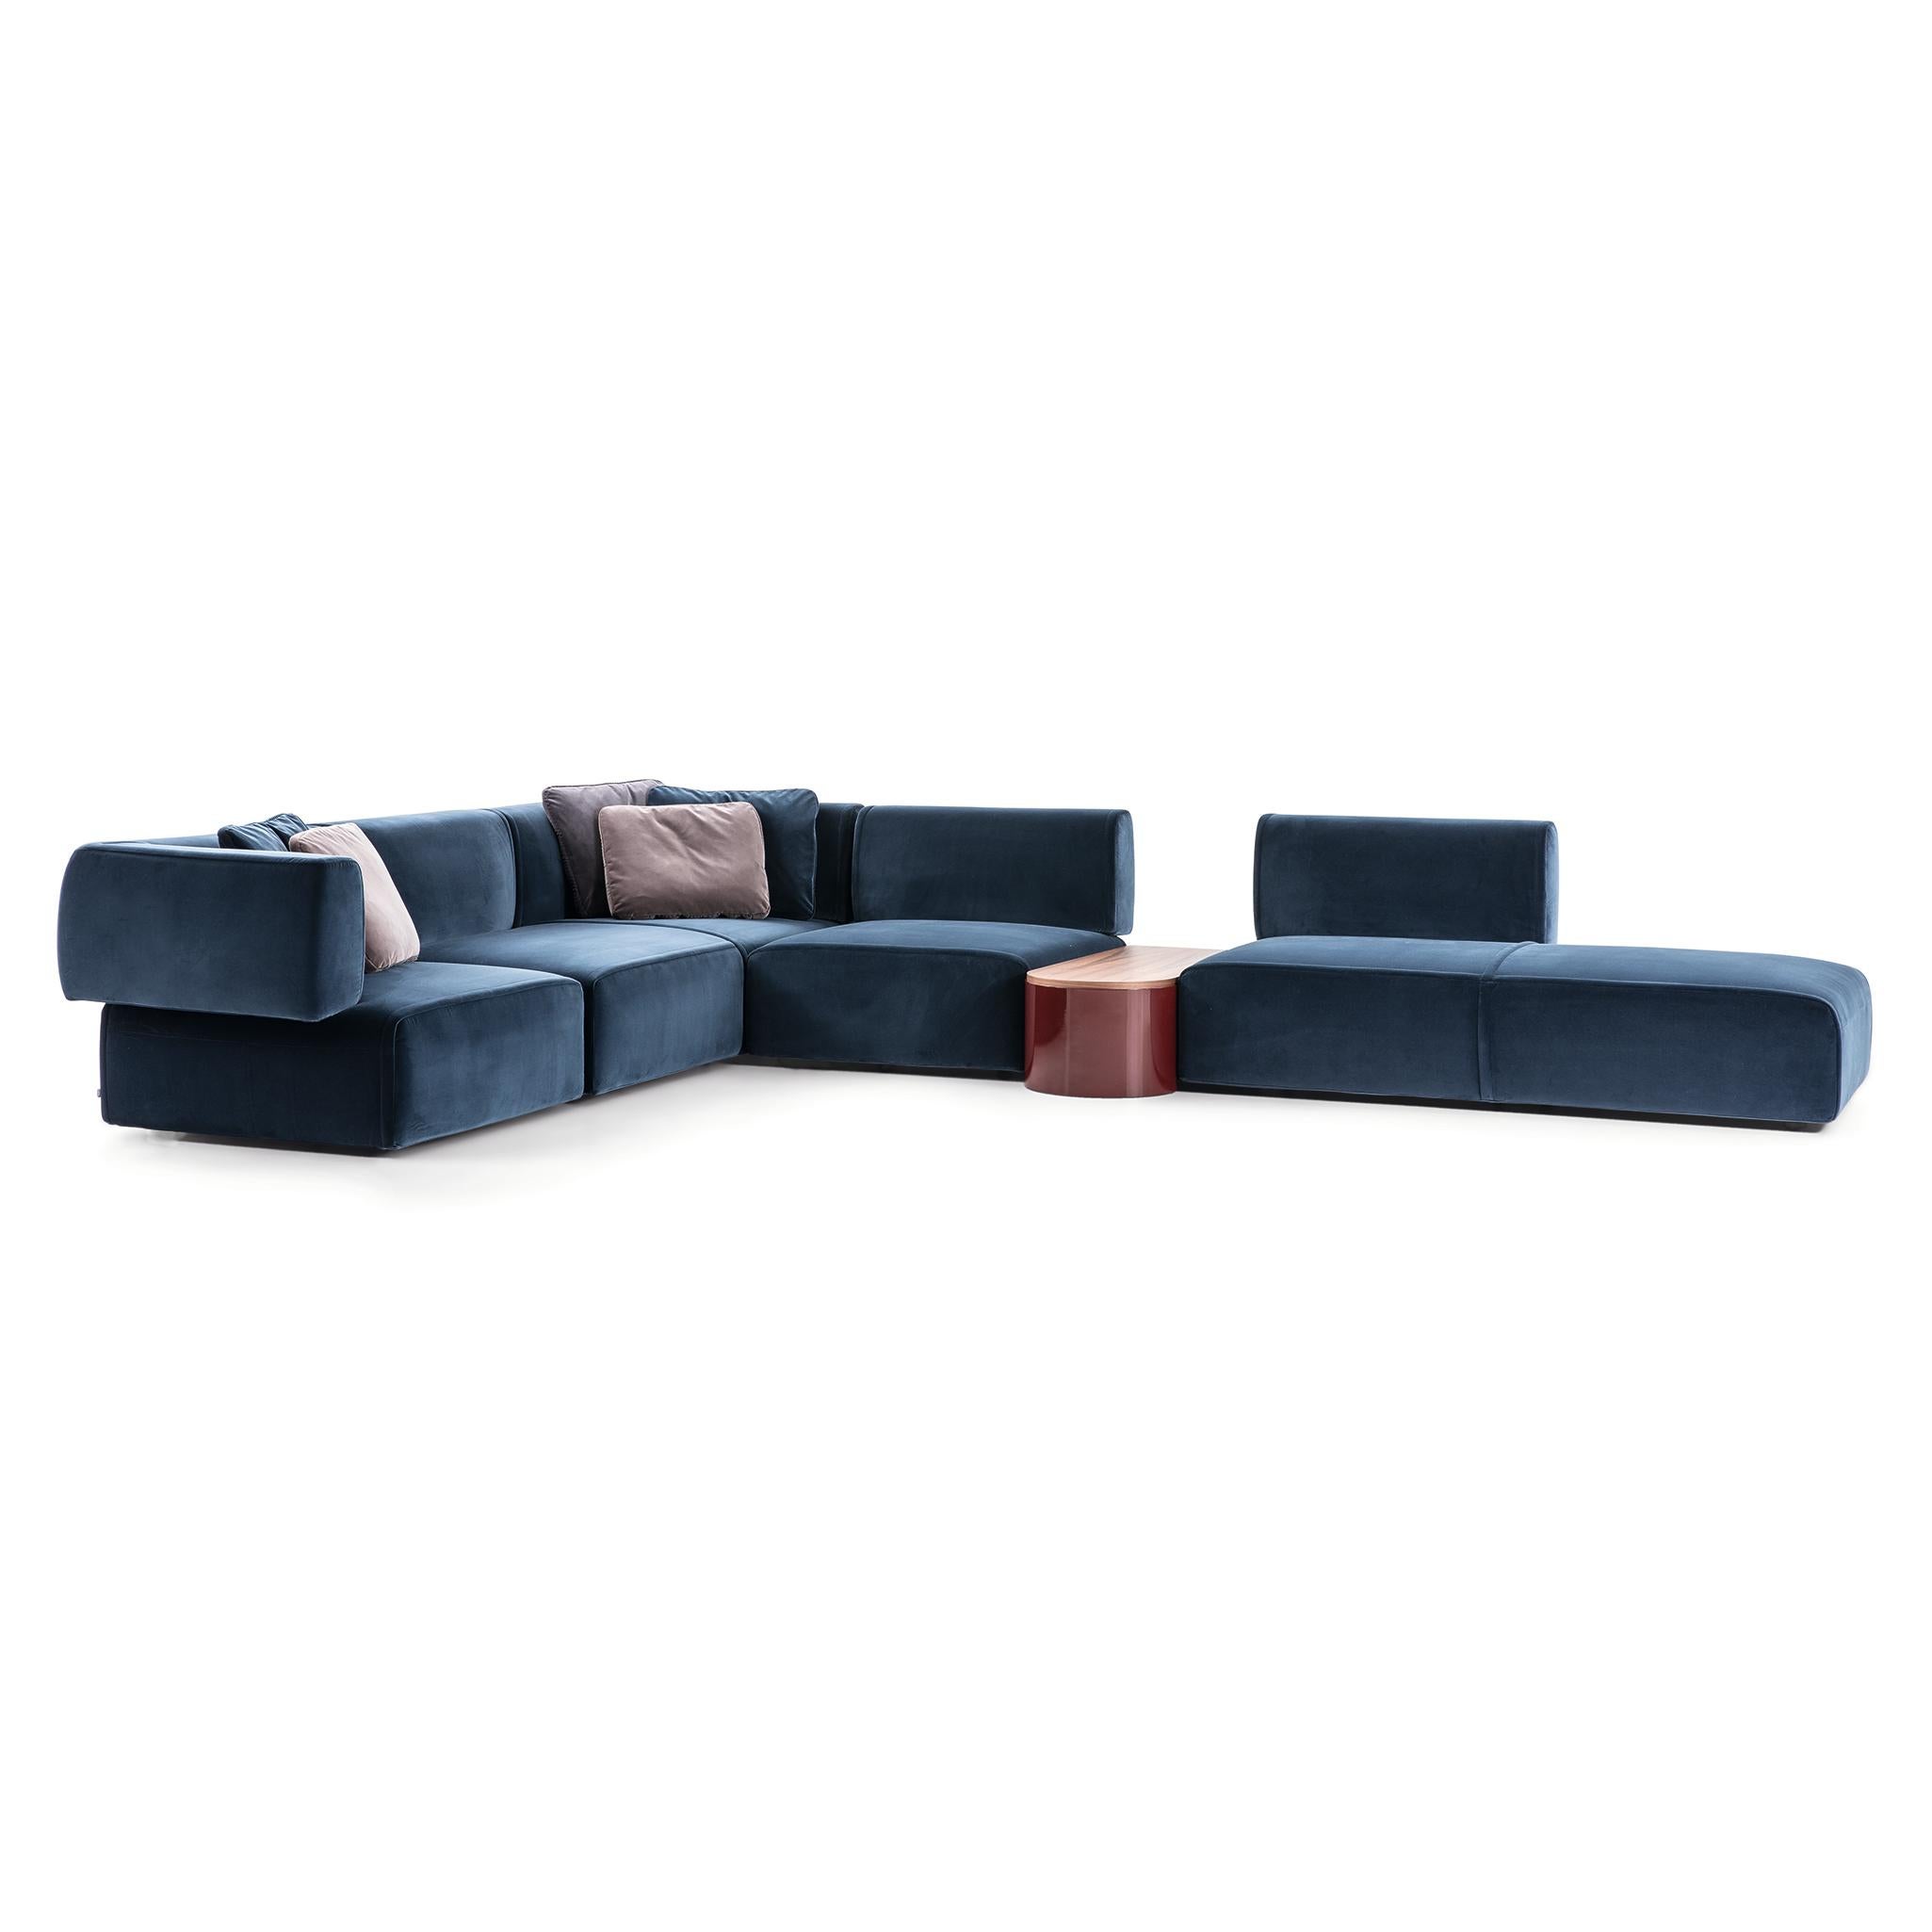 Italian Patricia Urquiola 'Bowy' Modular Sofa with Low Table, Foam and Fabric by Cassina For Sale